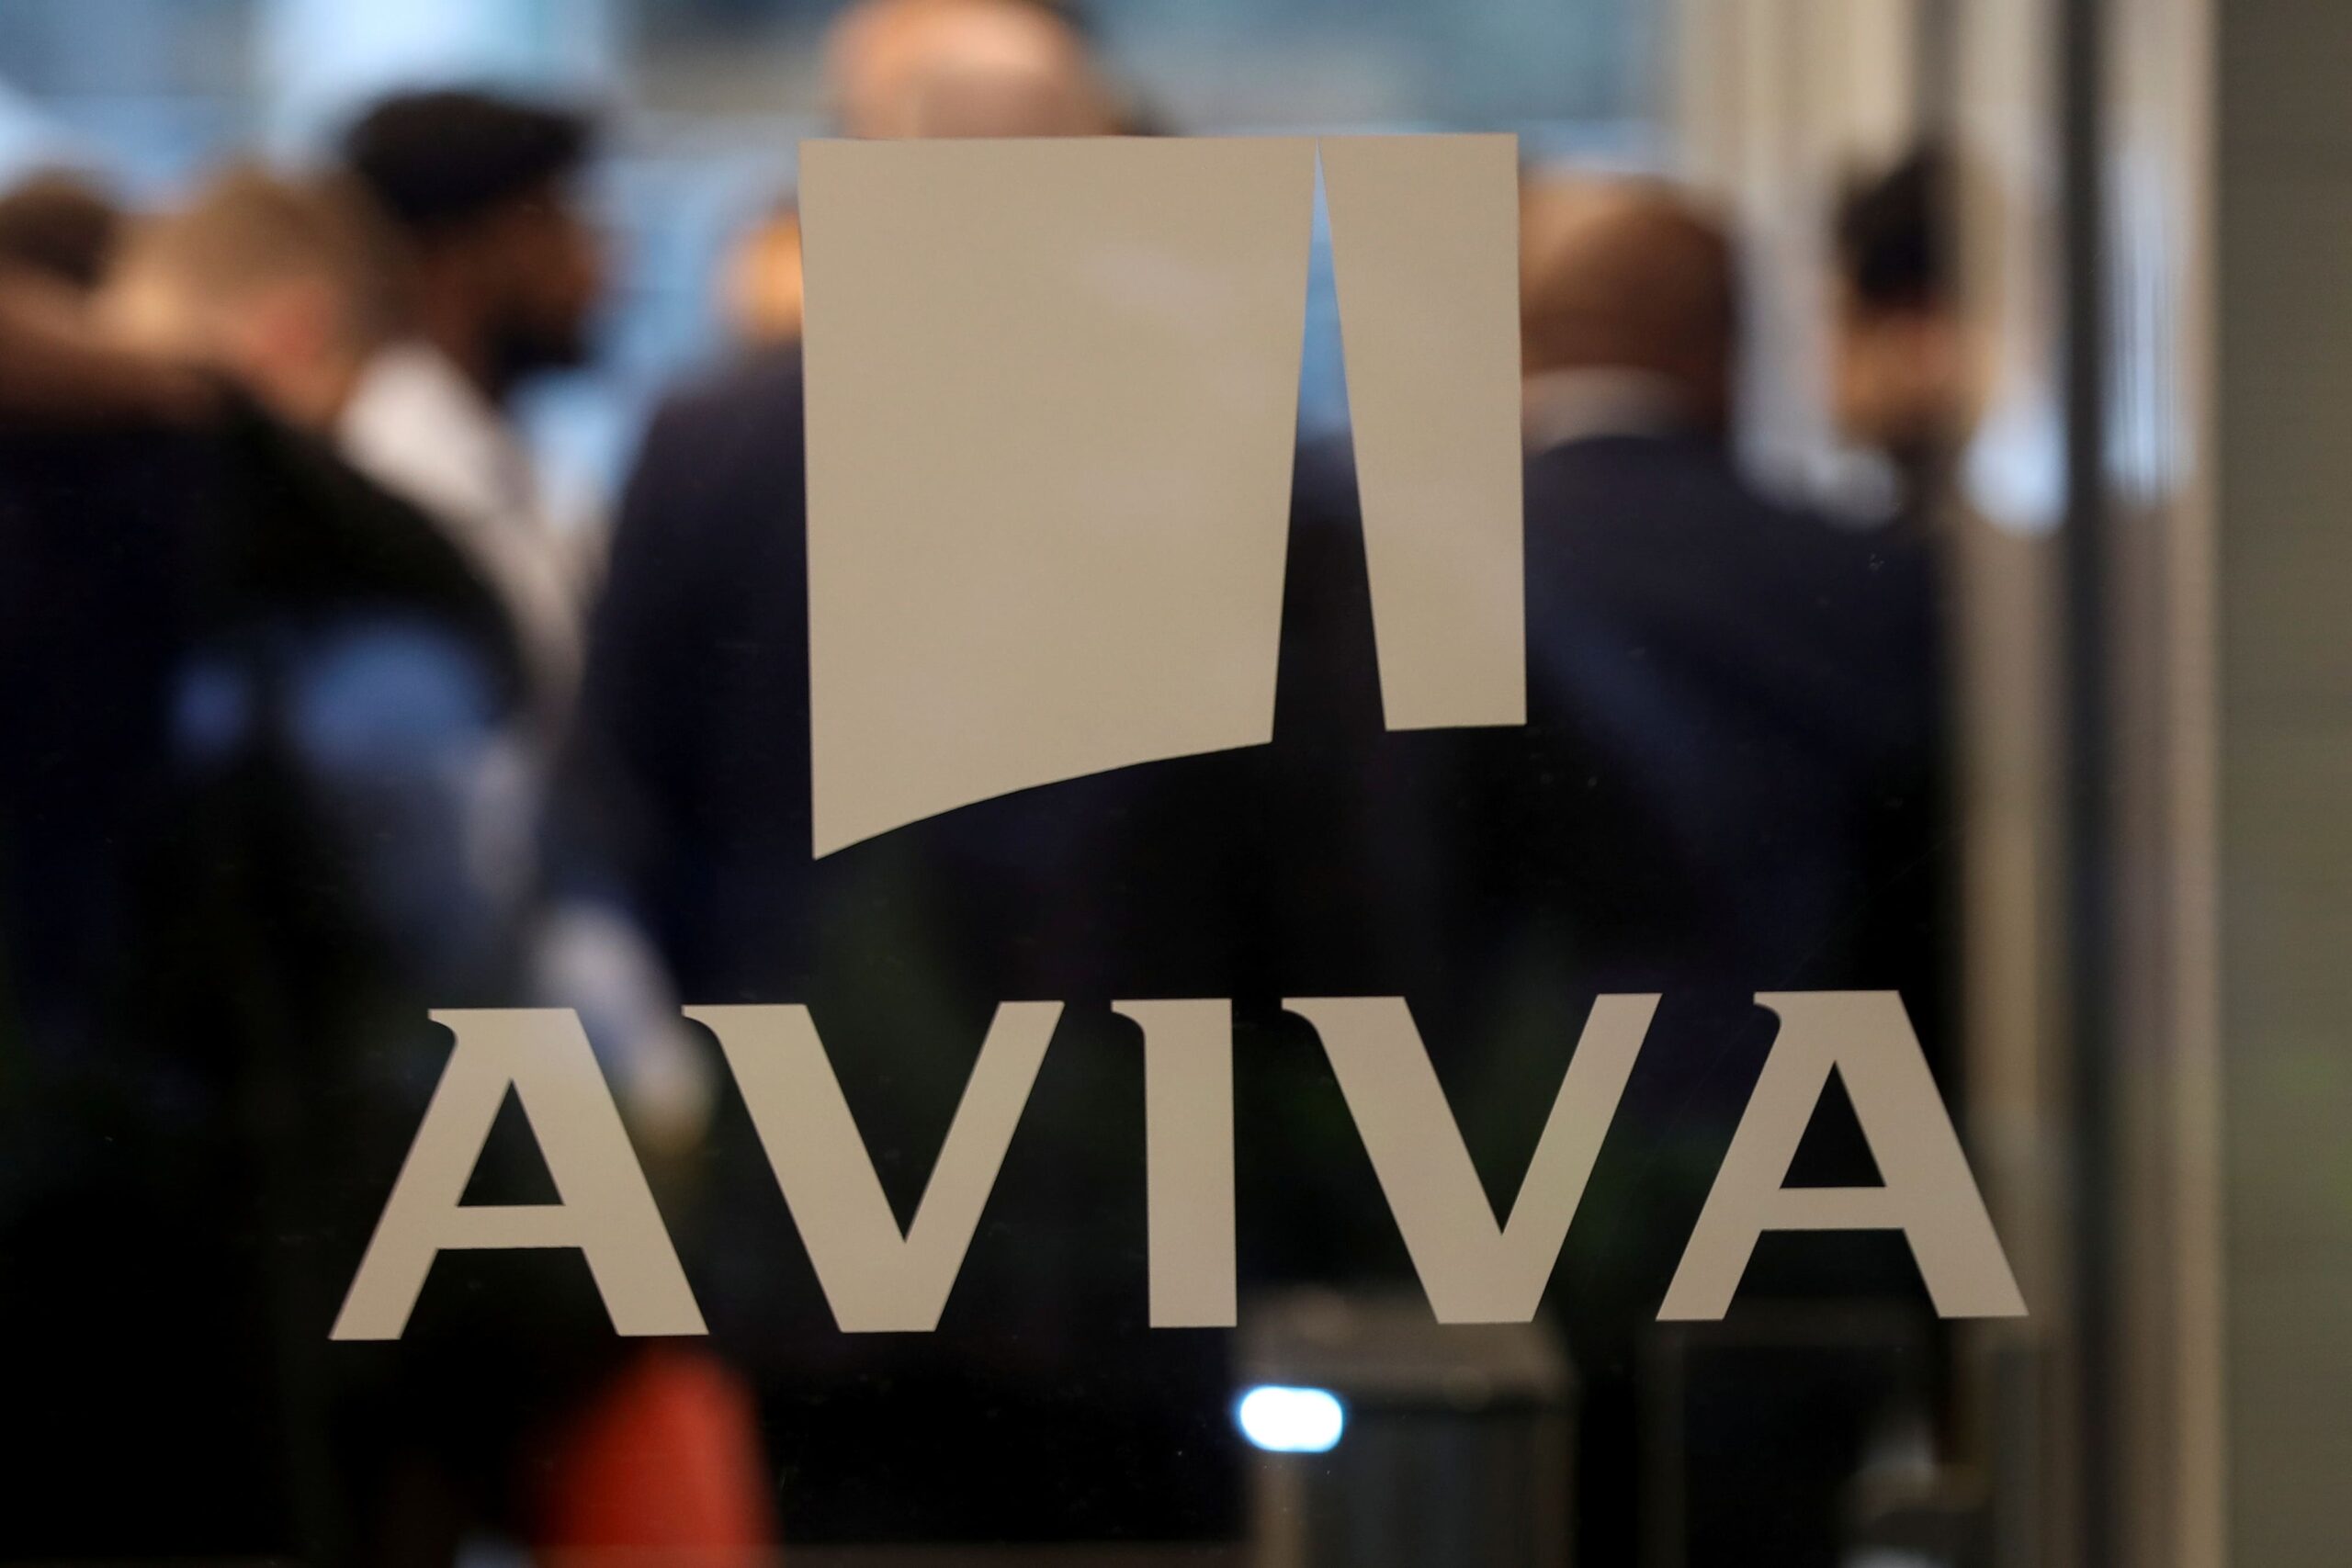 Aviva expands market reach with £460 million acquisition of AIG UK protection division